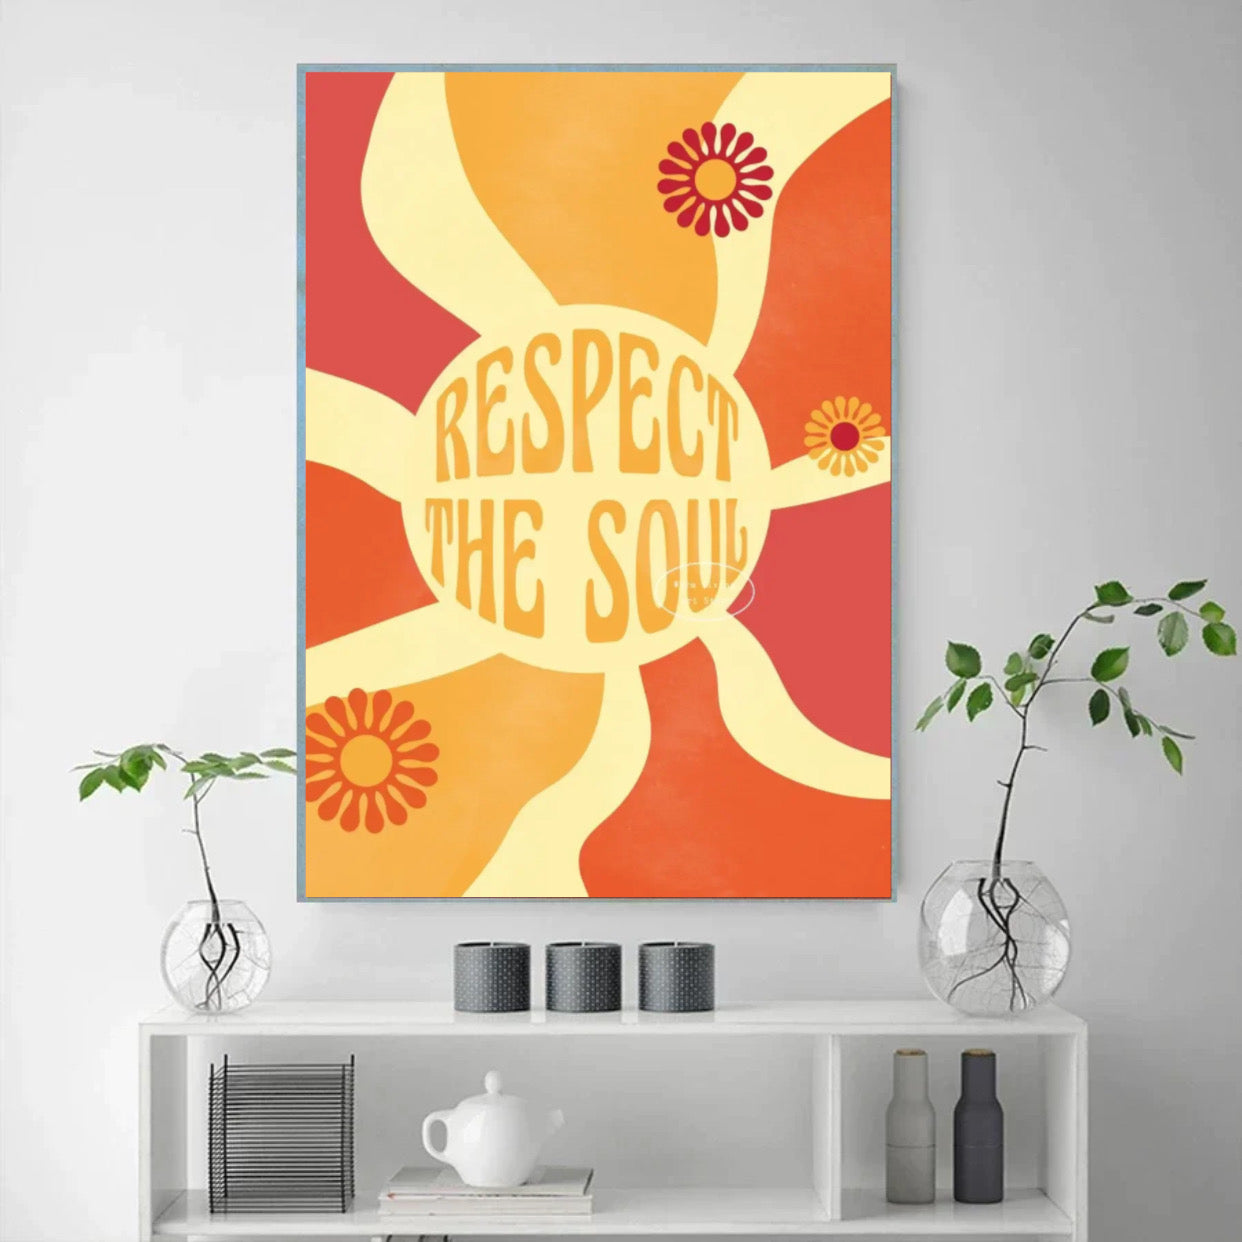 "respect the soul" poster